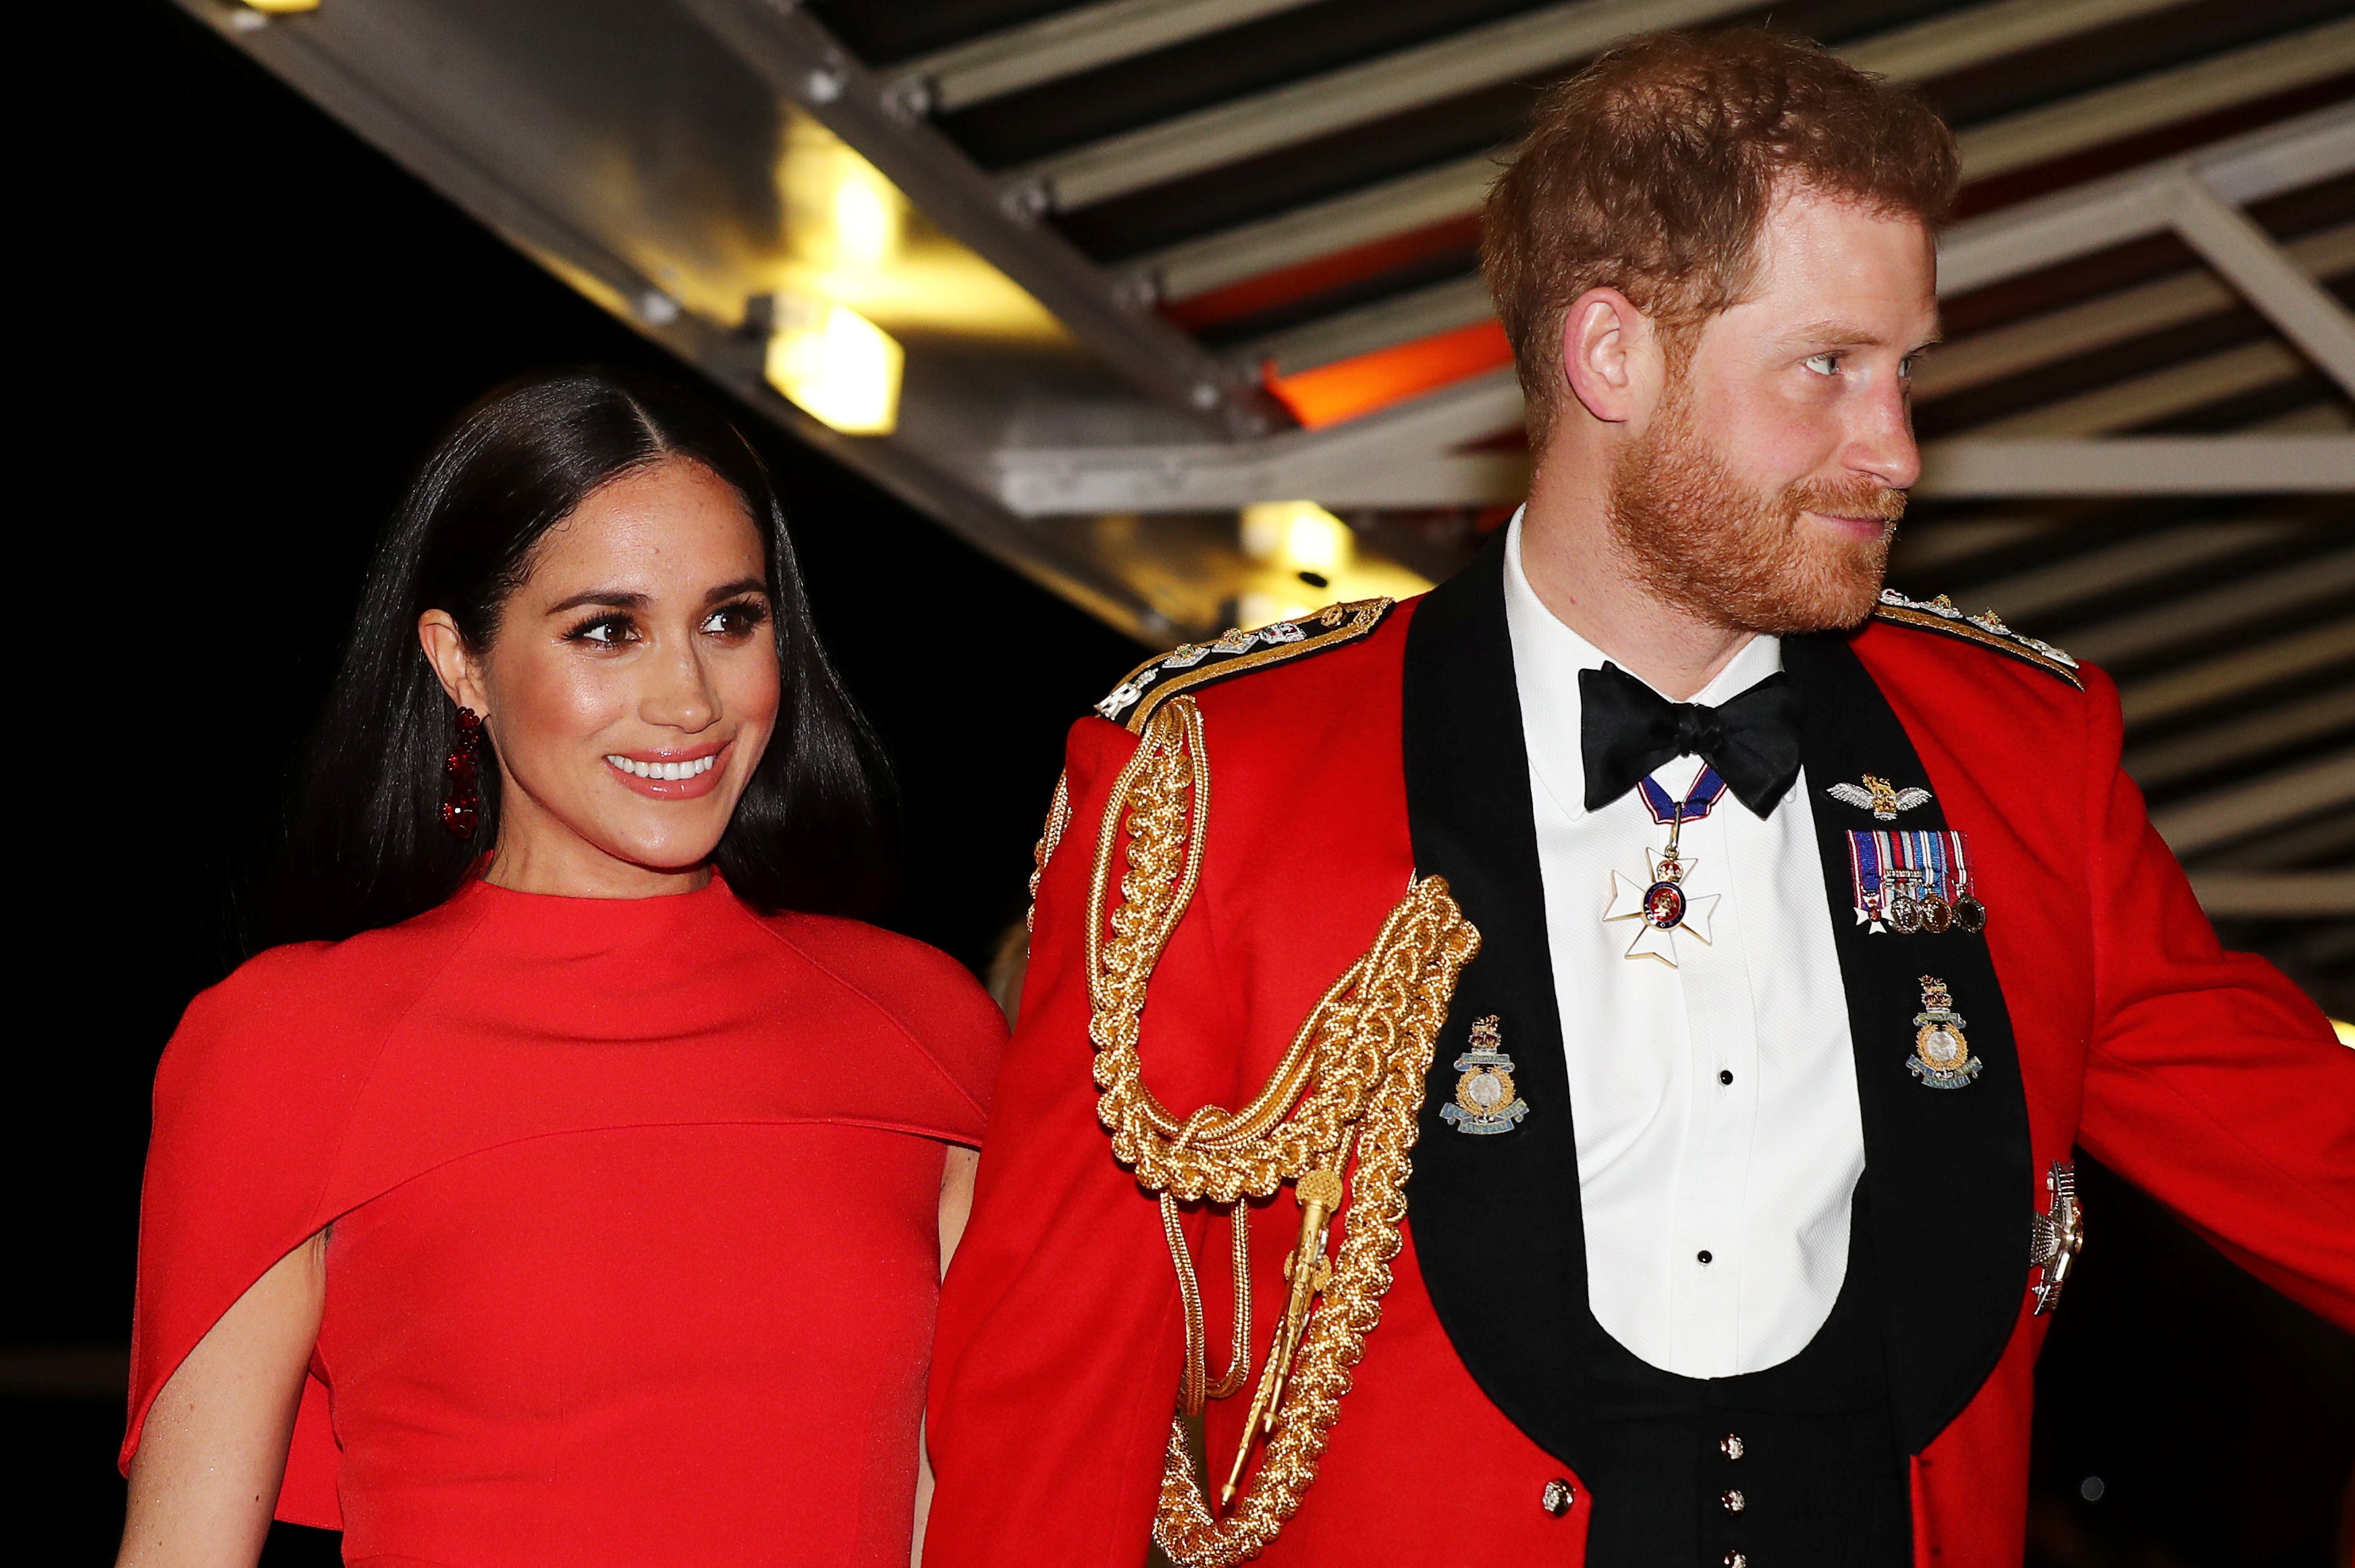 The Duke and Duchess of Sussex now live in California having stepped down as working royals (Simon Dawson/PA)